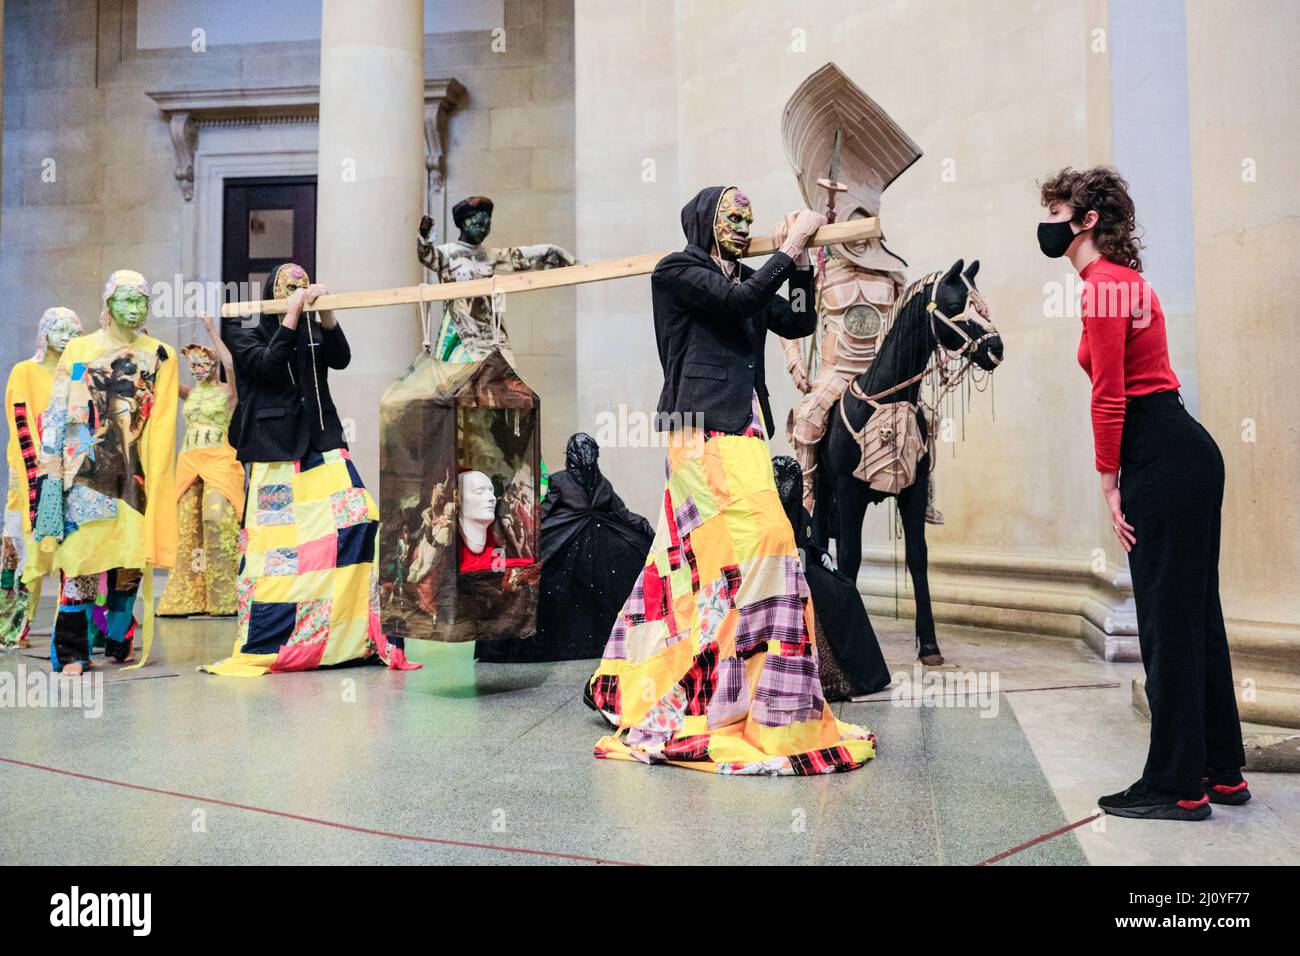 London, UK, 21st March 2022. Tate staffers with 'The Procession', which is one large installation with many different elements. Influence of both Indian and Indo-Caribbean culture, including many carnival elements, can be seen. According to Locke, 'The Procession' is not a historic textbook, but rather an 'extended poem of contrasting references and imagery. The annual Tate Britain Commission has been undertaken by Guyanese-British artist Hew Locke with 'The Procession'. Credit: Imageplotter/Alamy Live News Stock Photo